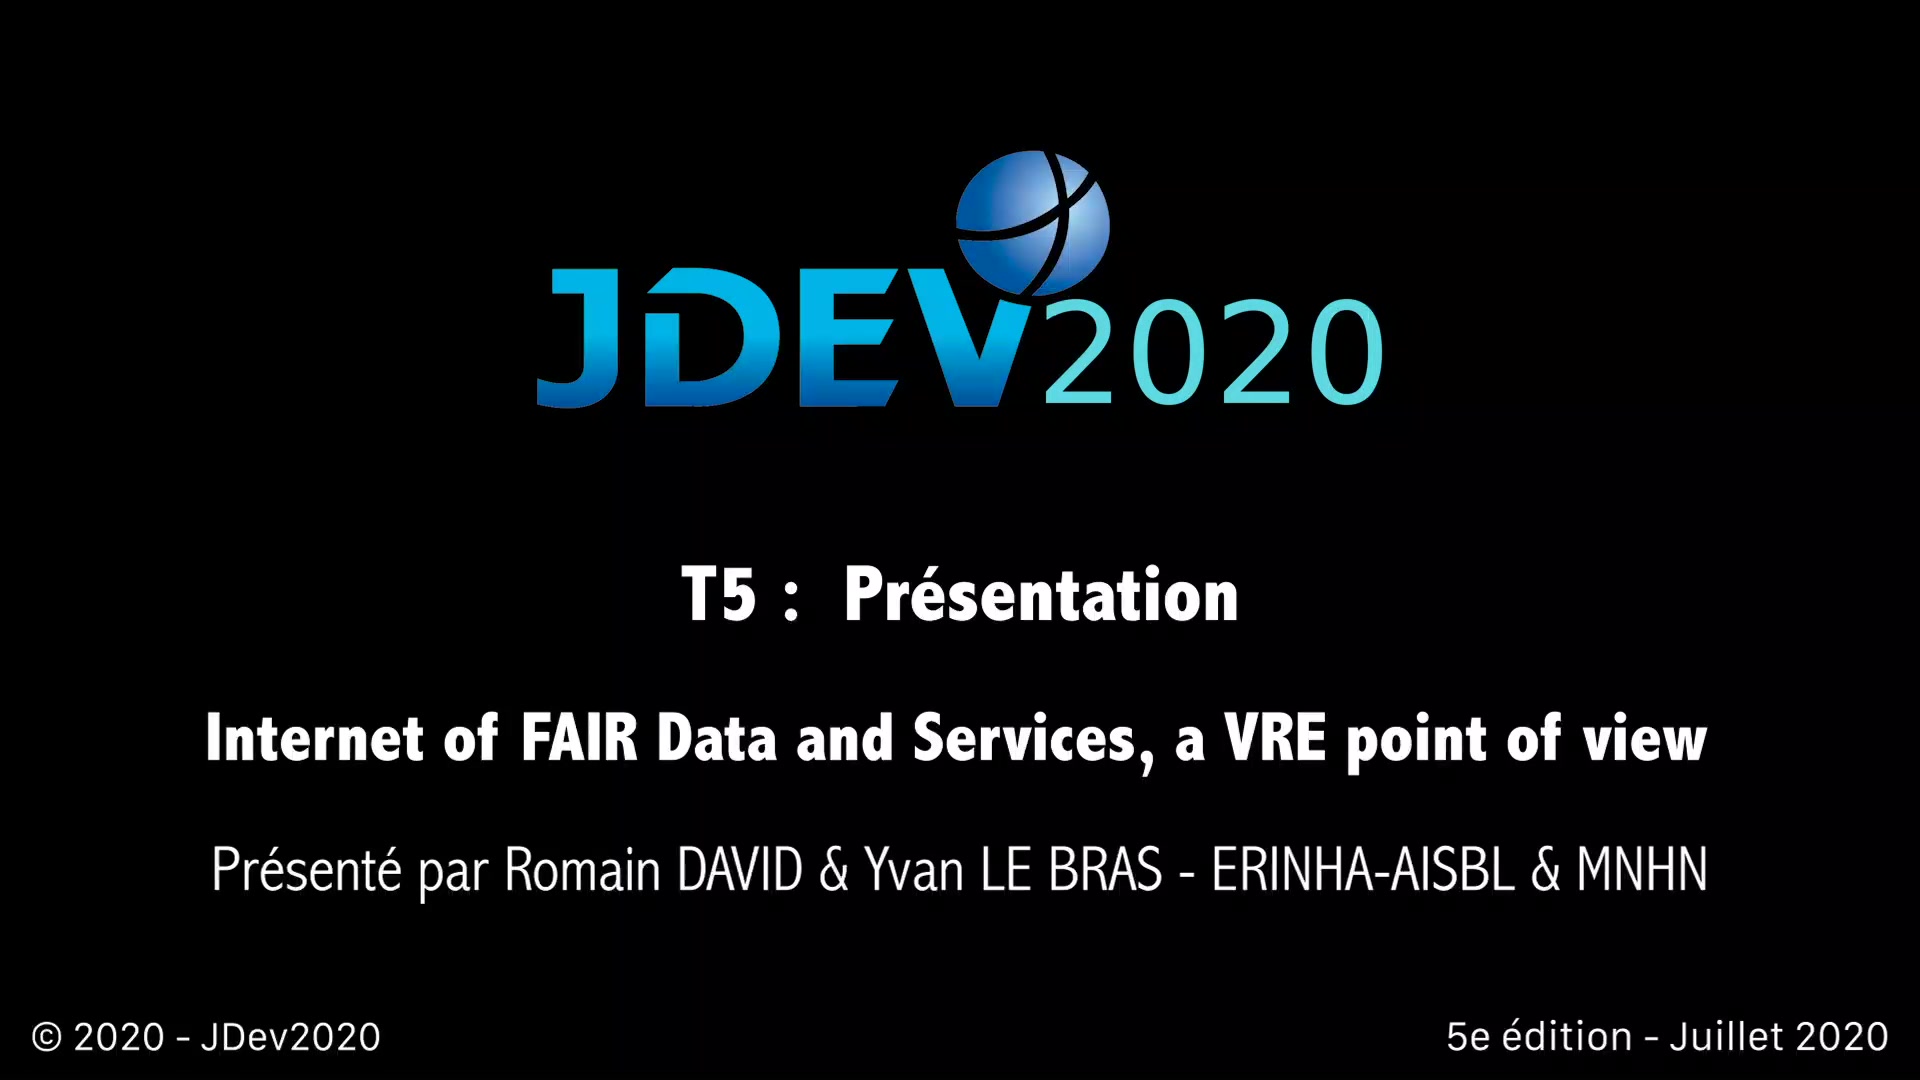 JDev2020 : T5 : Internet of FAIR Data and Services, a VRE point of view